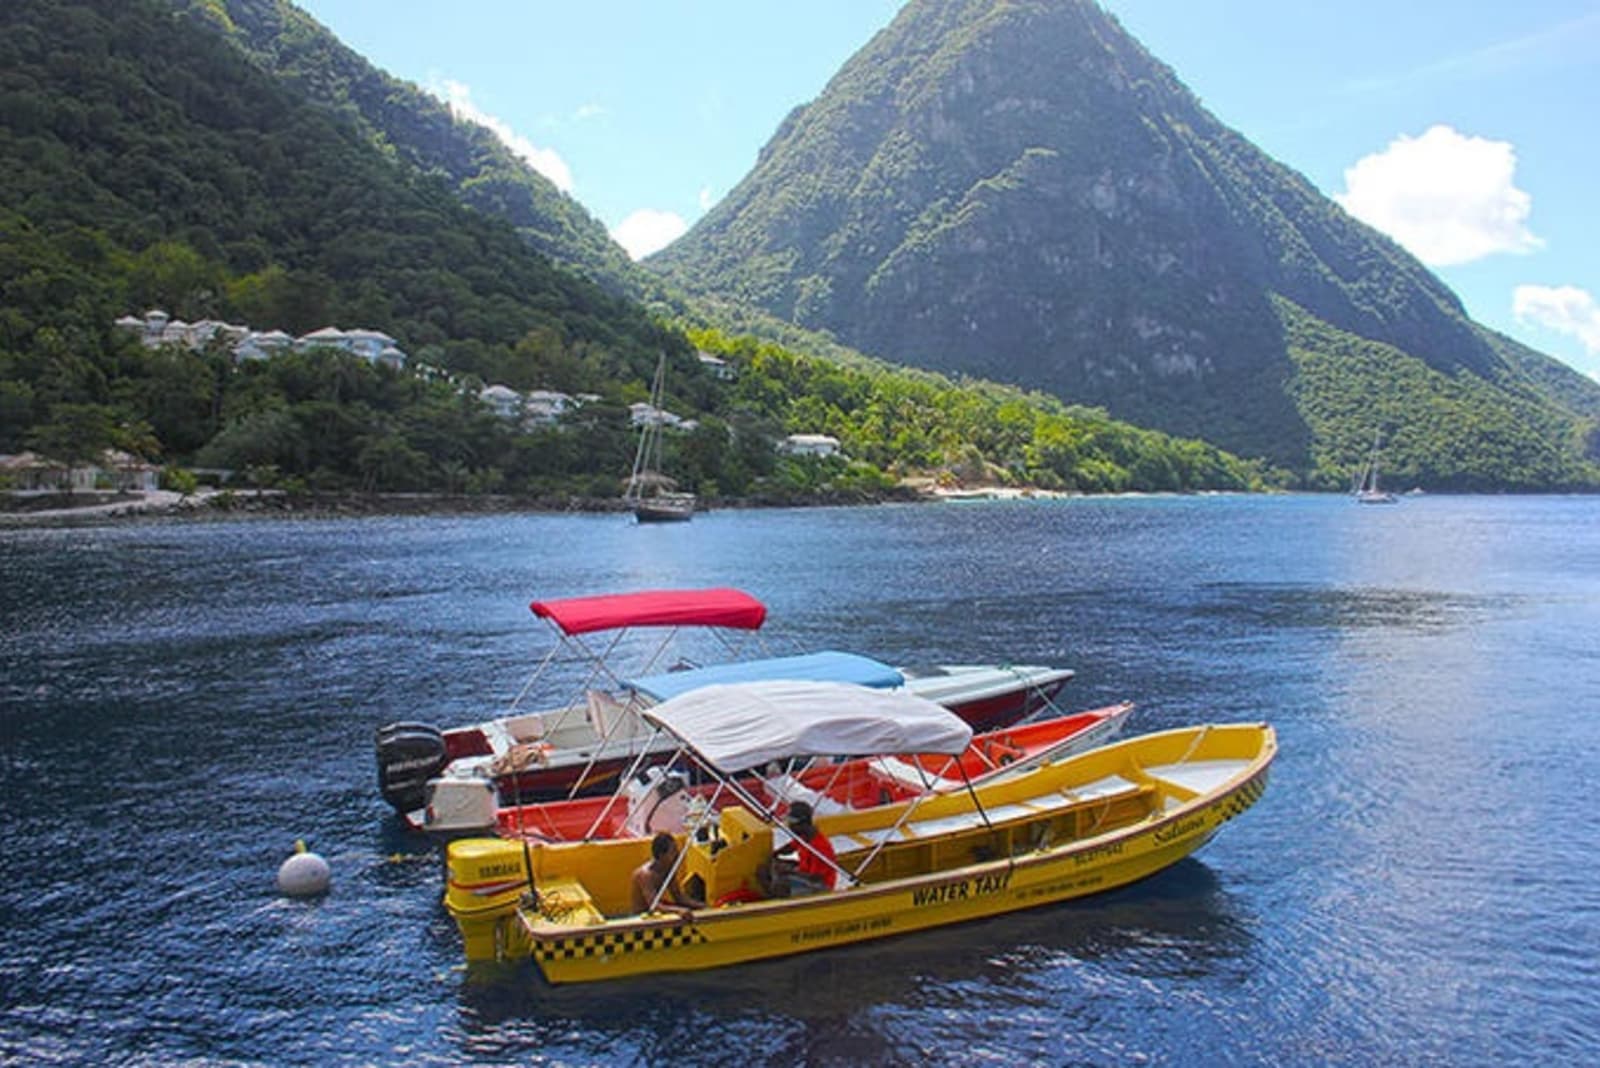 ps-st-lucia-boat-to-pitonsuse.jpg